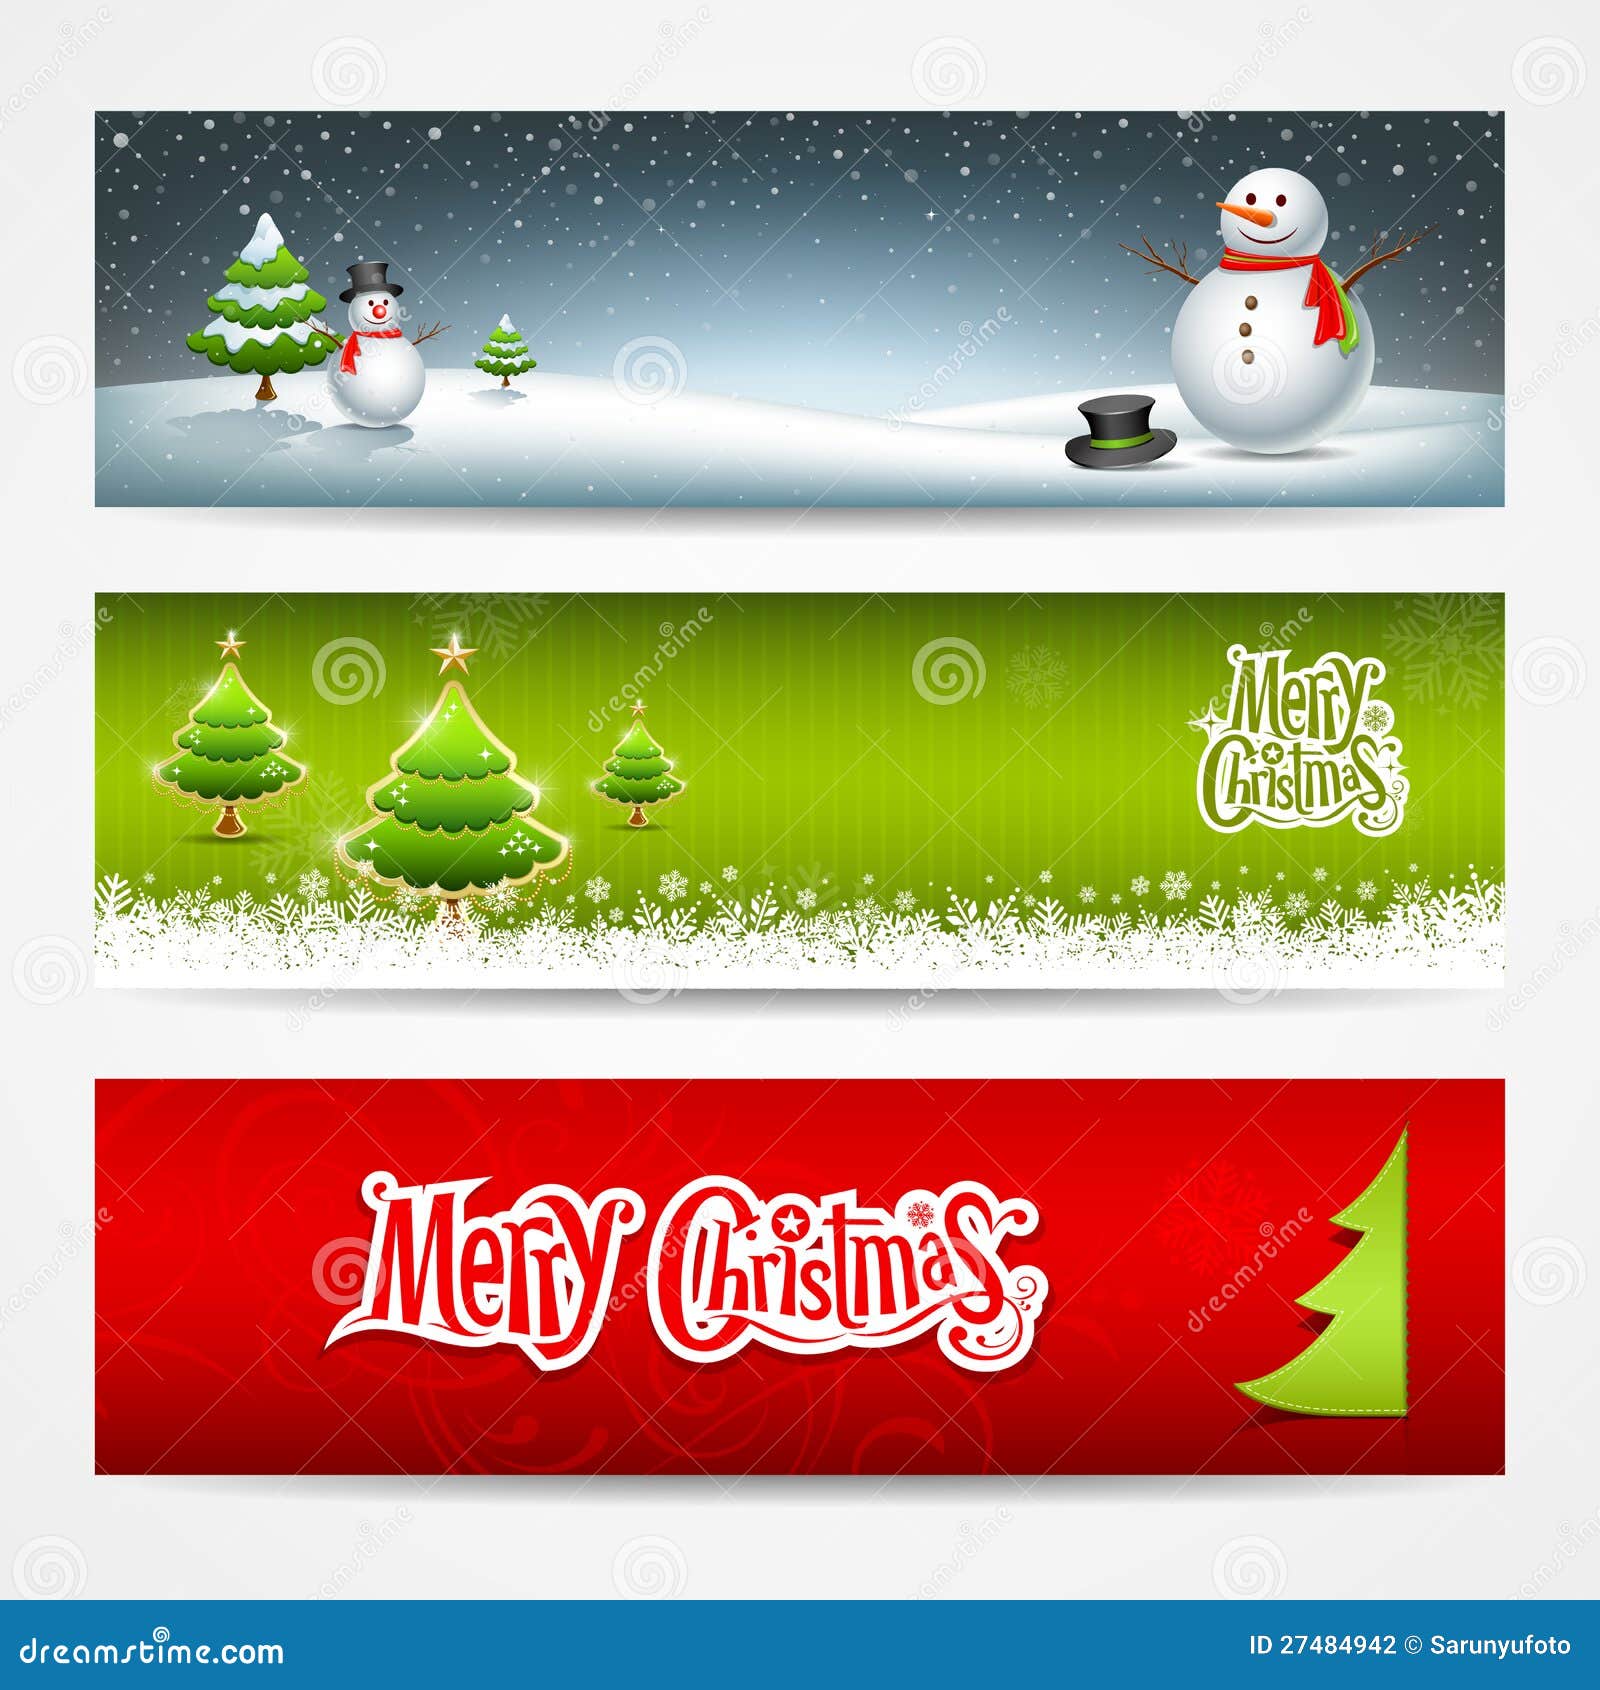 Merry Christmas Banners Set Design Stock Vector - Illustration of happy ...